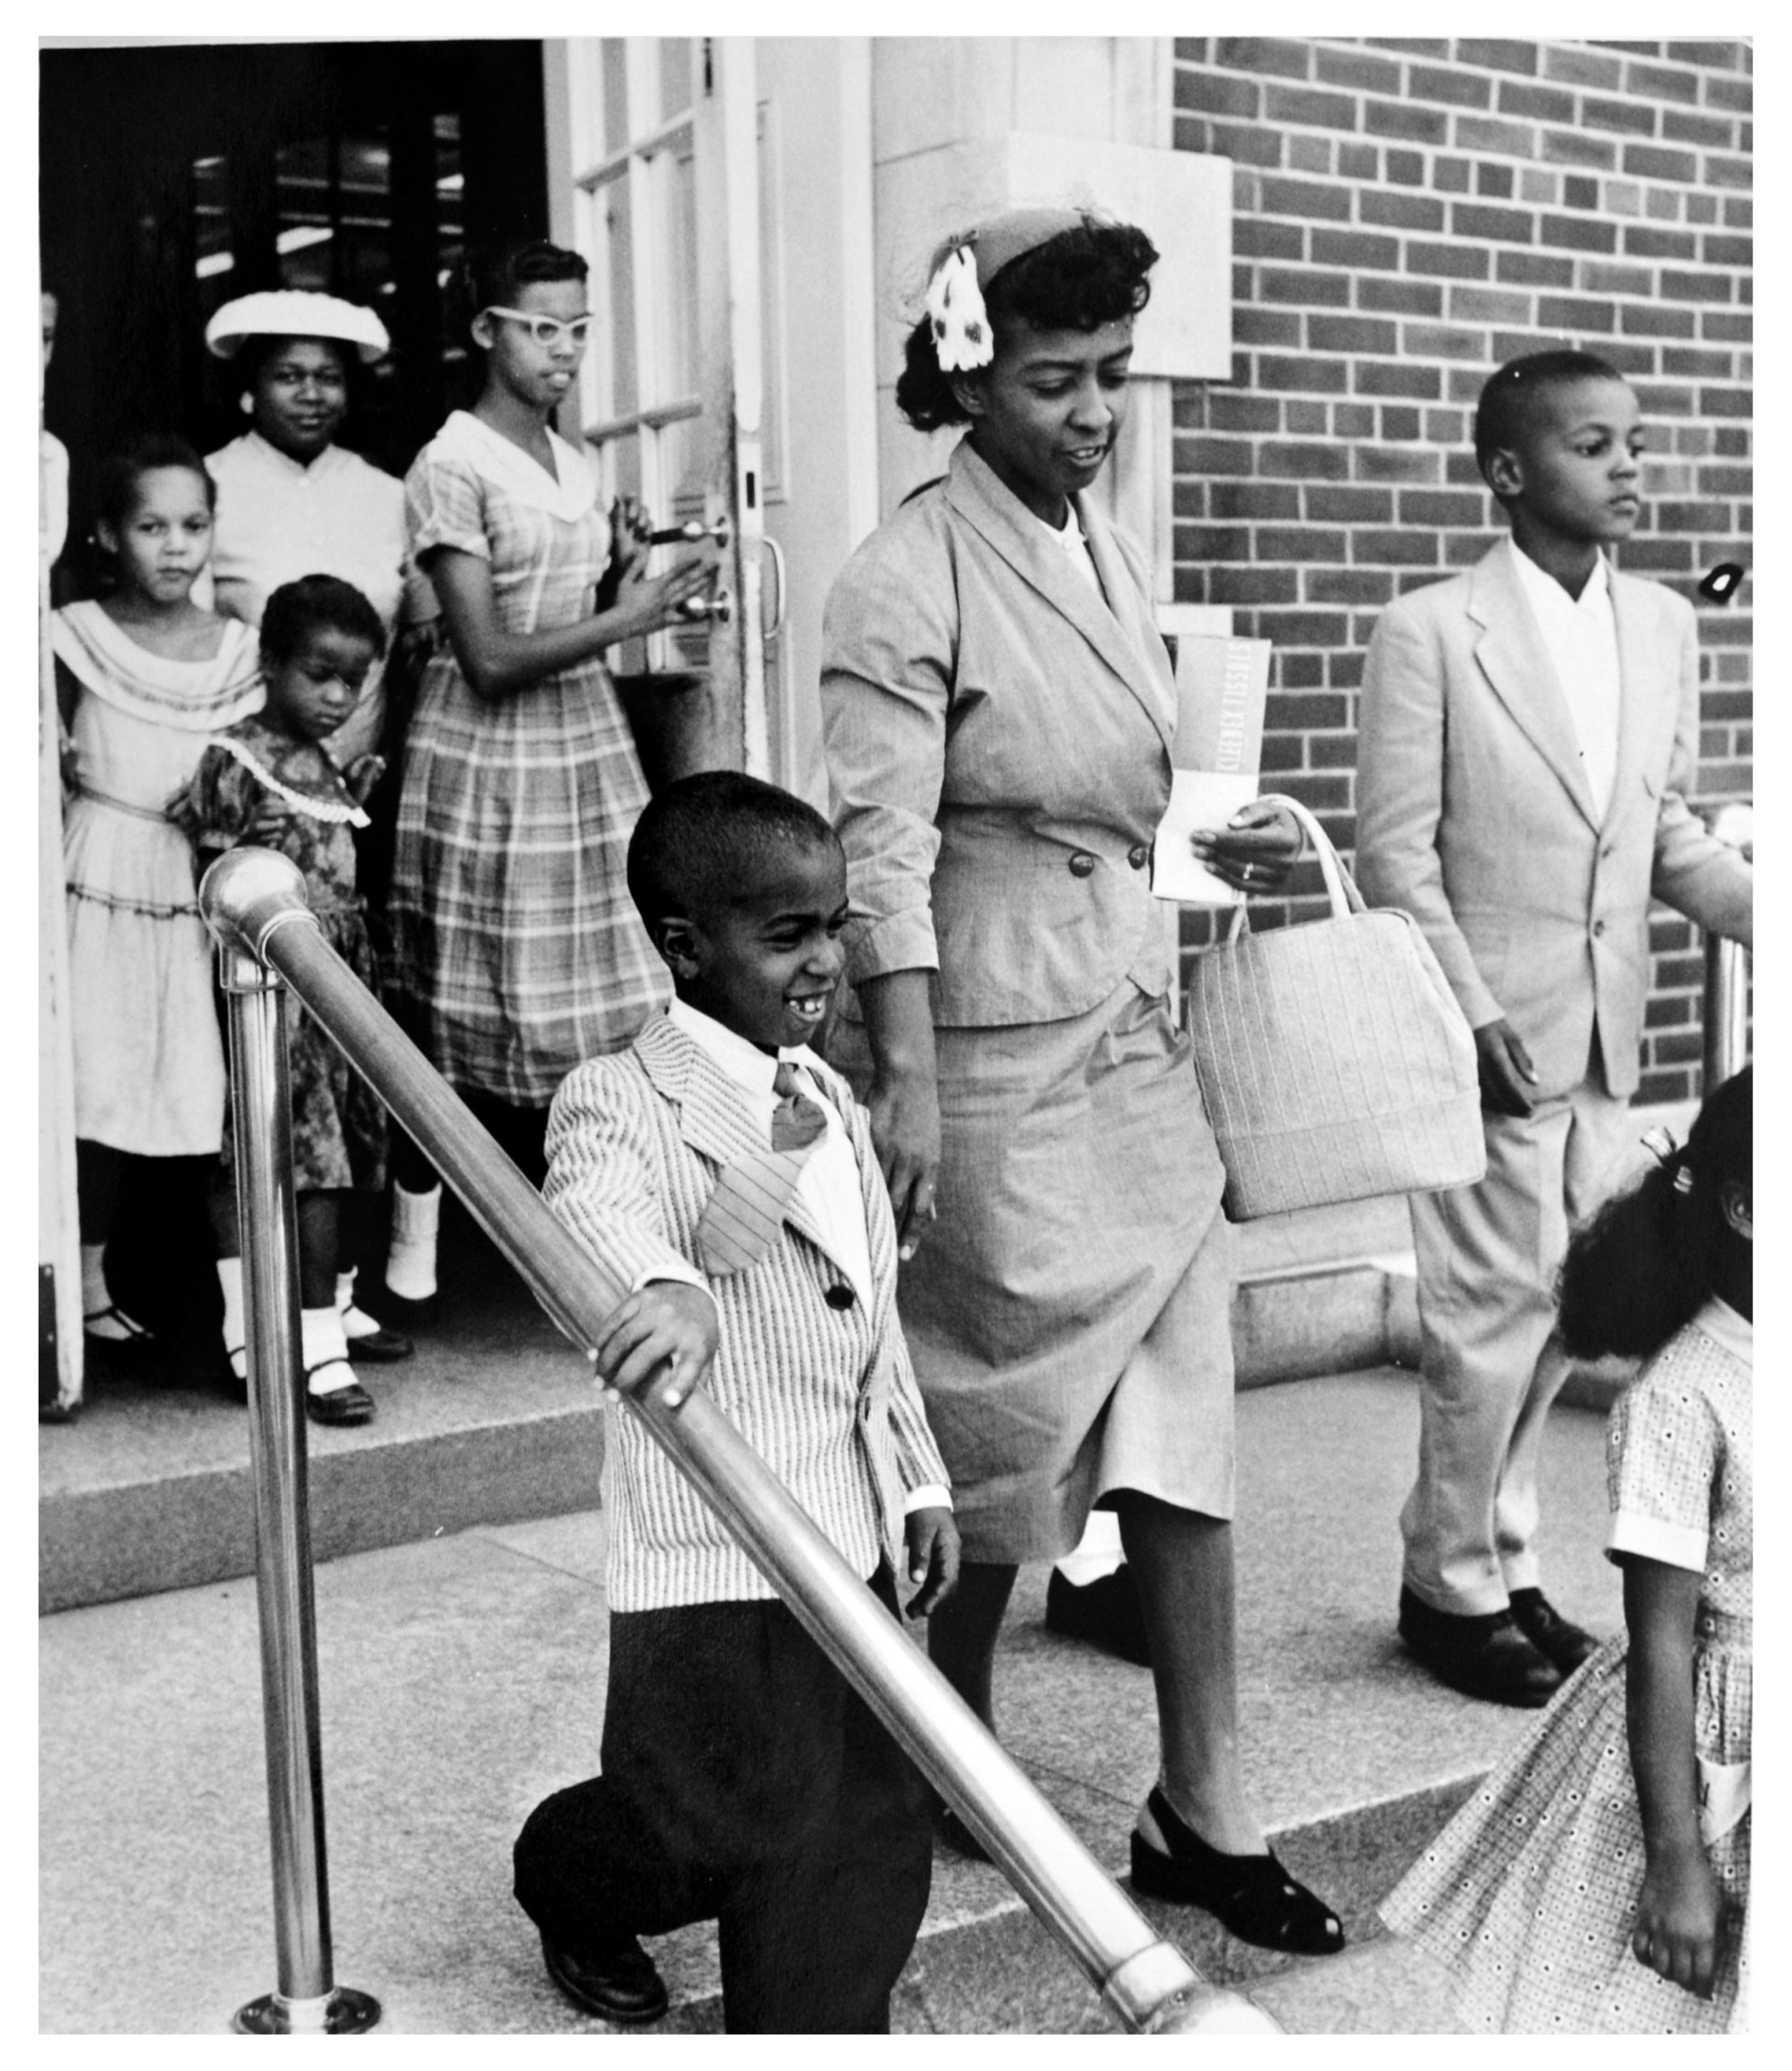 Black children and their parents leave the Alexandria courthouse on September 8, 1958 after being denied an injunction to end segregation of the city’s schools. At the time, Virginia state law required the closure of any public school system that admitted Black students to white schools, as part of Virginia’s “massive resistance” to the Brown v. Board of Education decision. Source: DC Public Library, Star Collection © Washington Post.